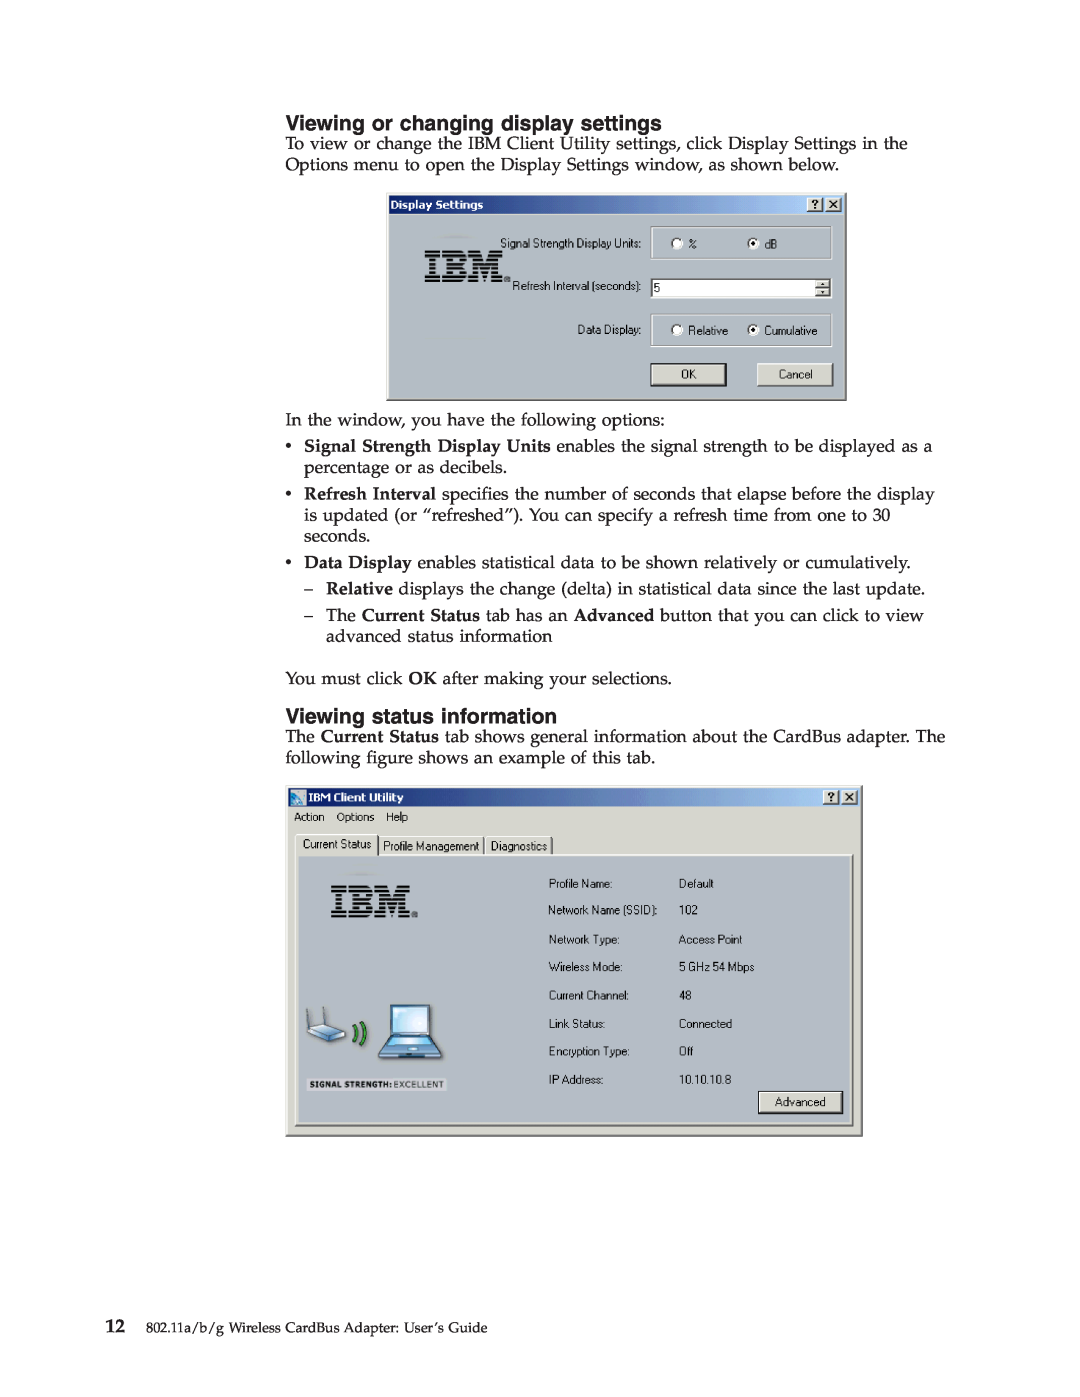 Trust Computer Products IBM 802.11a/b/g Wireless CardBus Adapter manual Viewing or changing display settings 